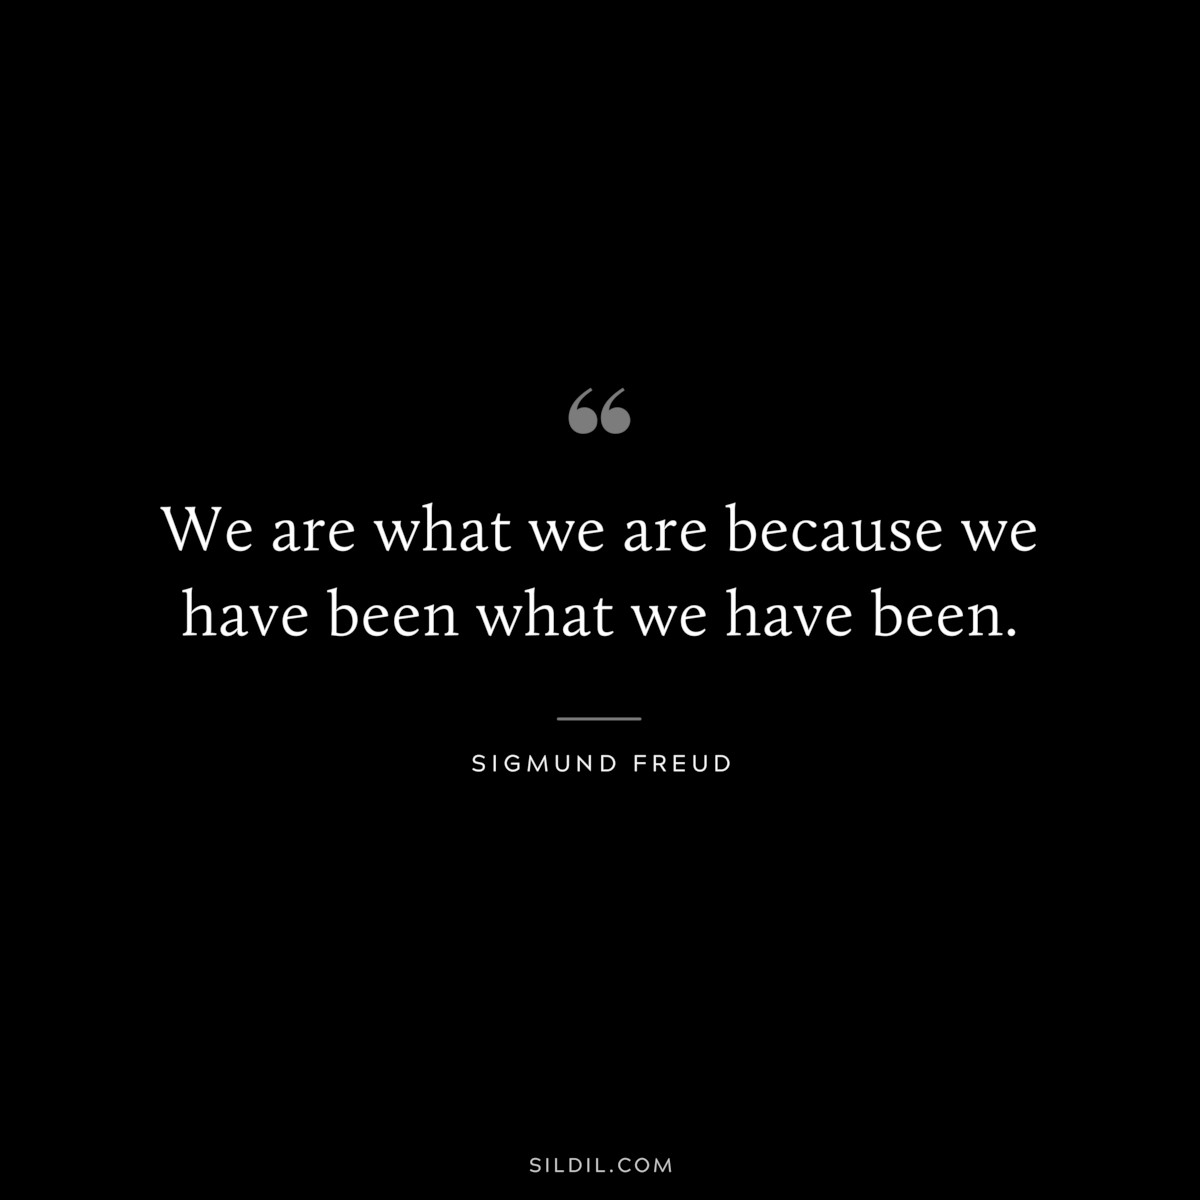 We are what we are because we have been what we have been. ― Sigmund Frued